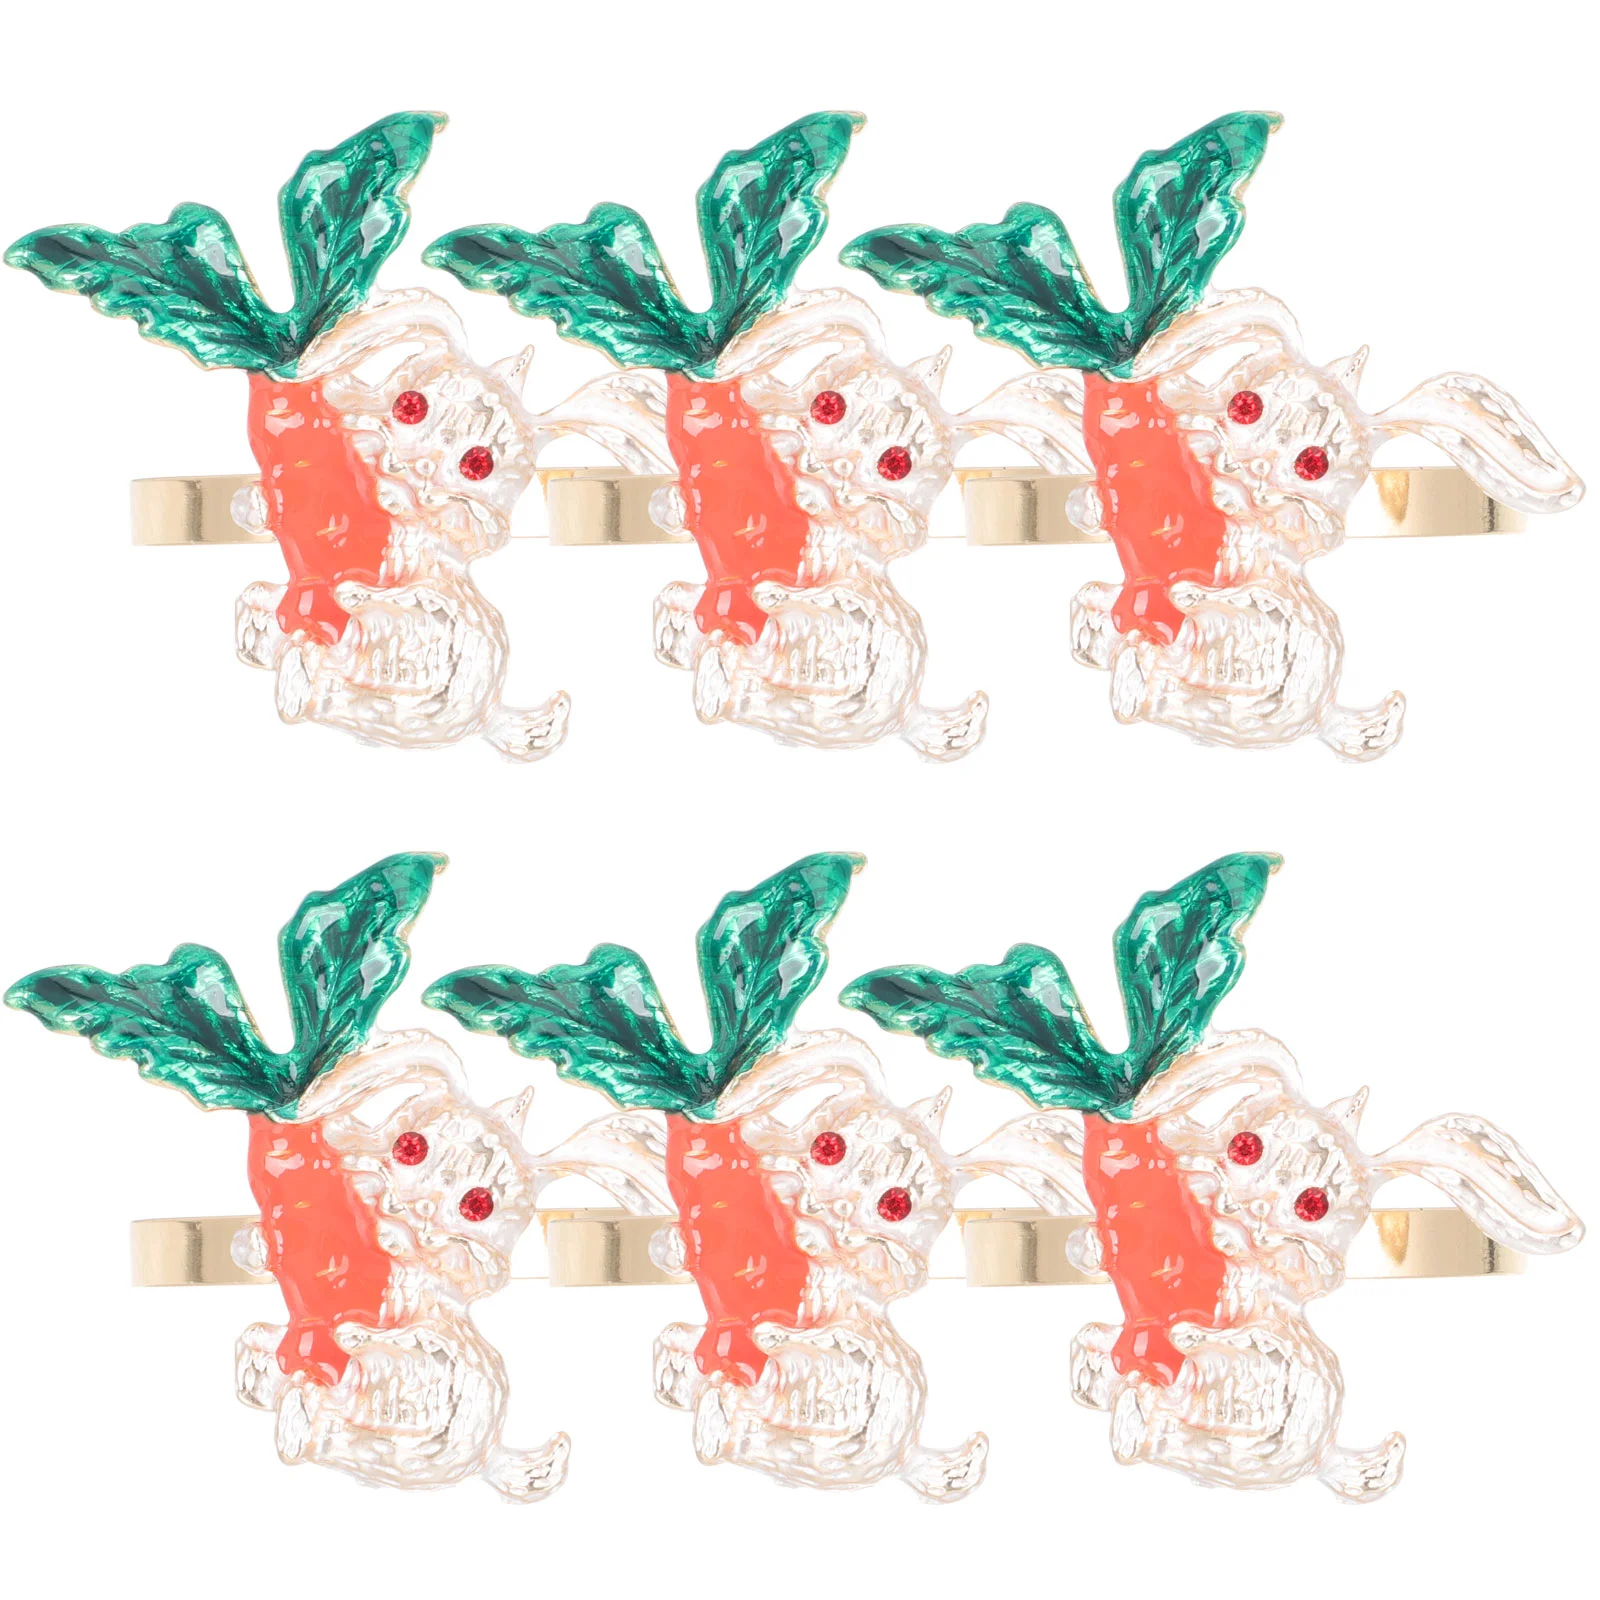 

Napkin Ring Easter Bunny Holder Rings Party Buckles Dining Serviette Rabbit Table Shaped Ears Holding Carrot Supplies Wrap